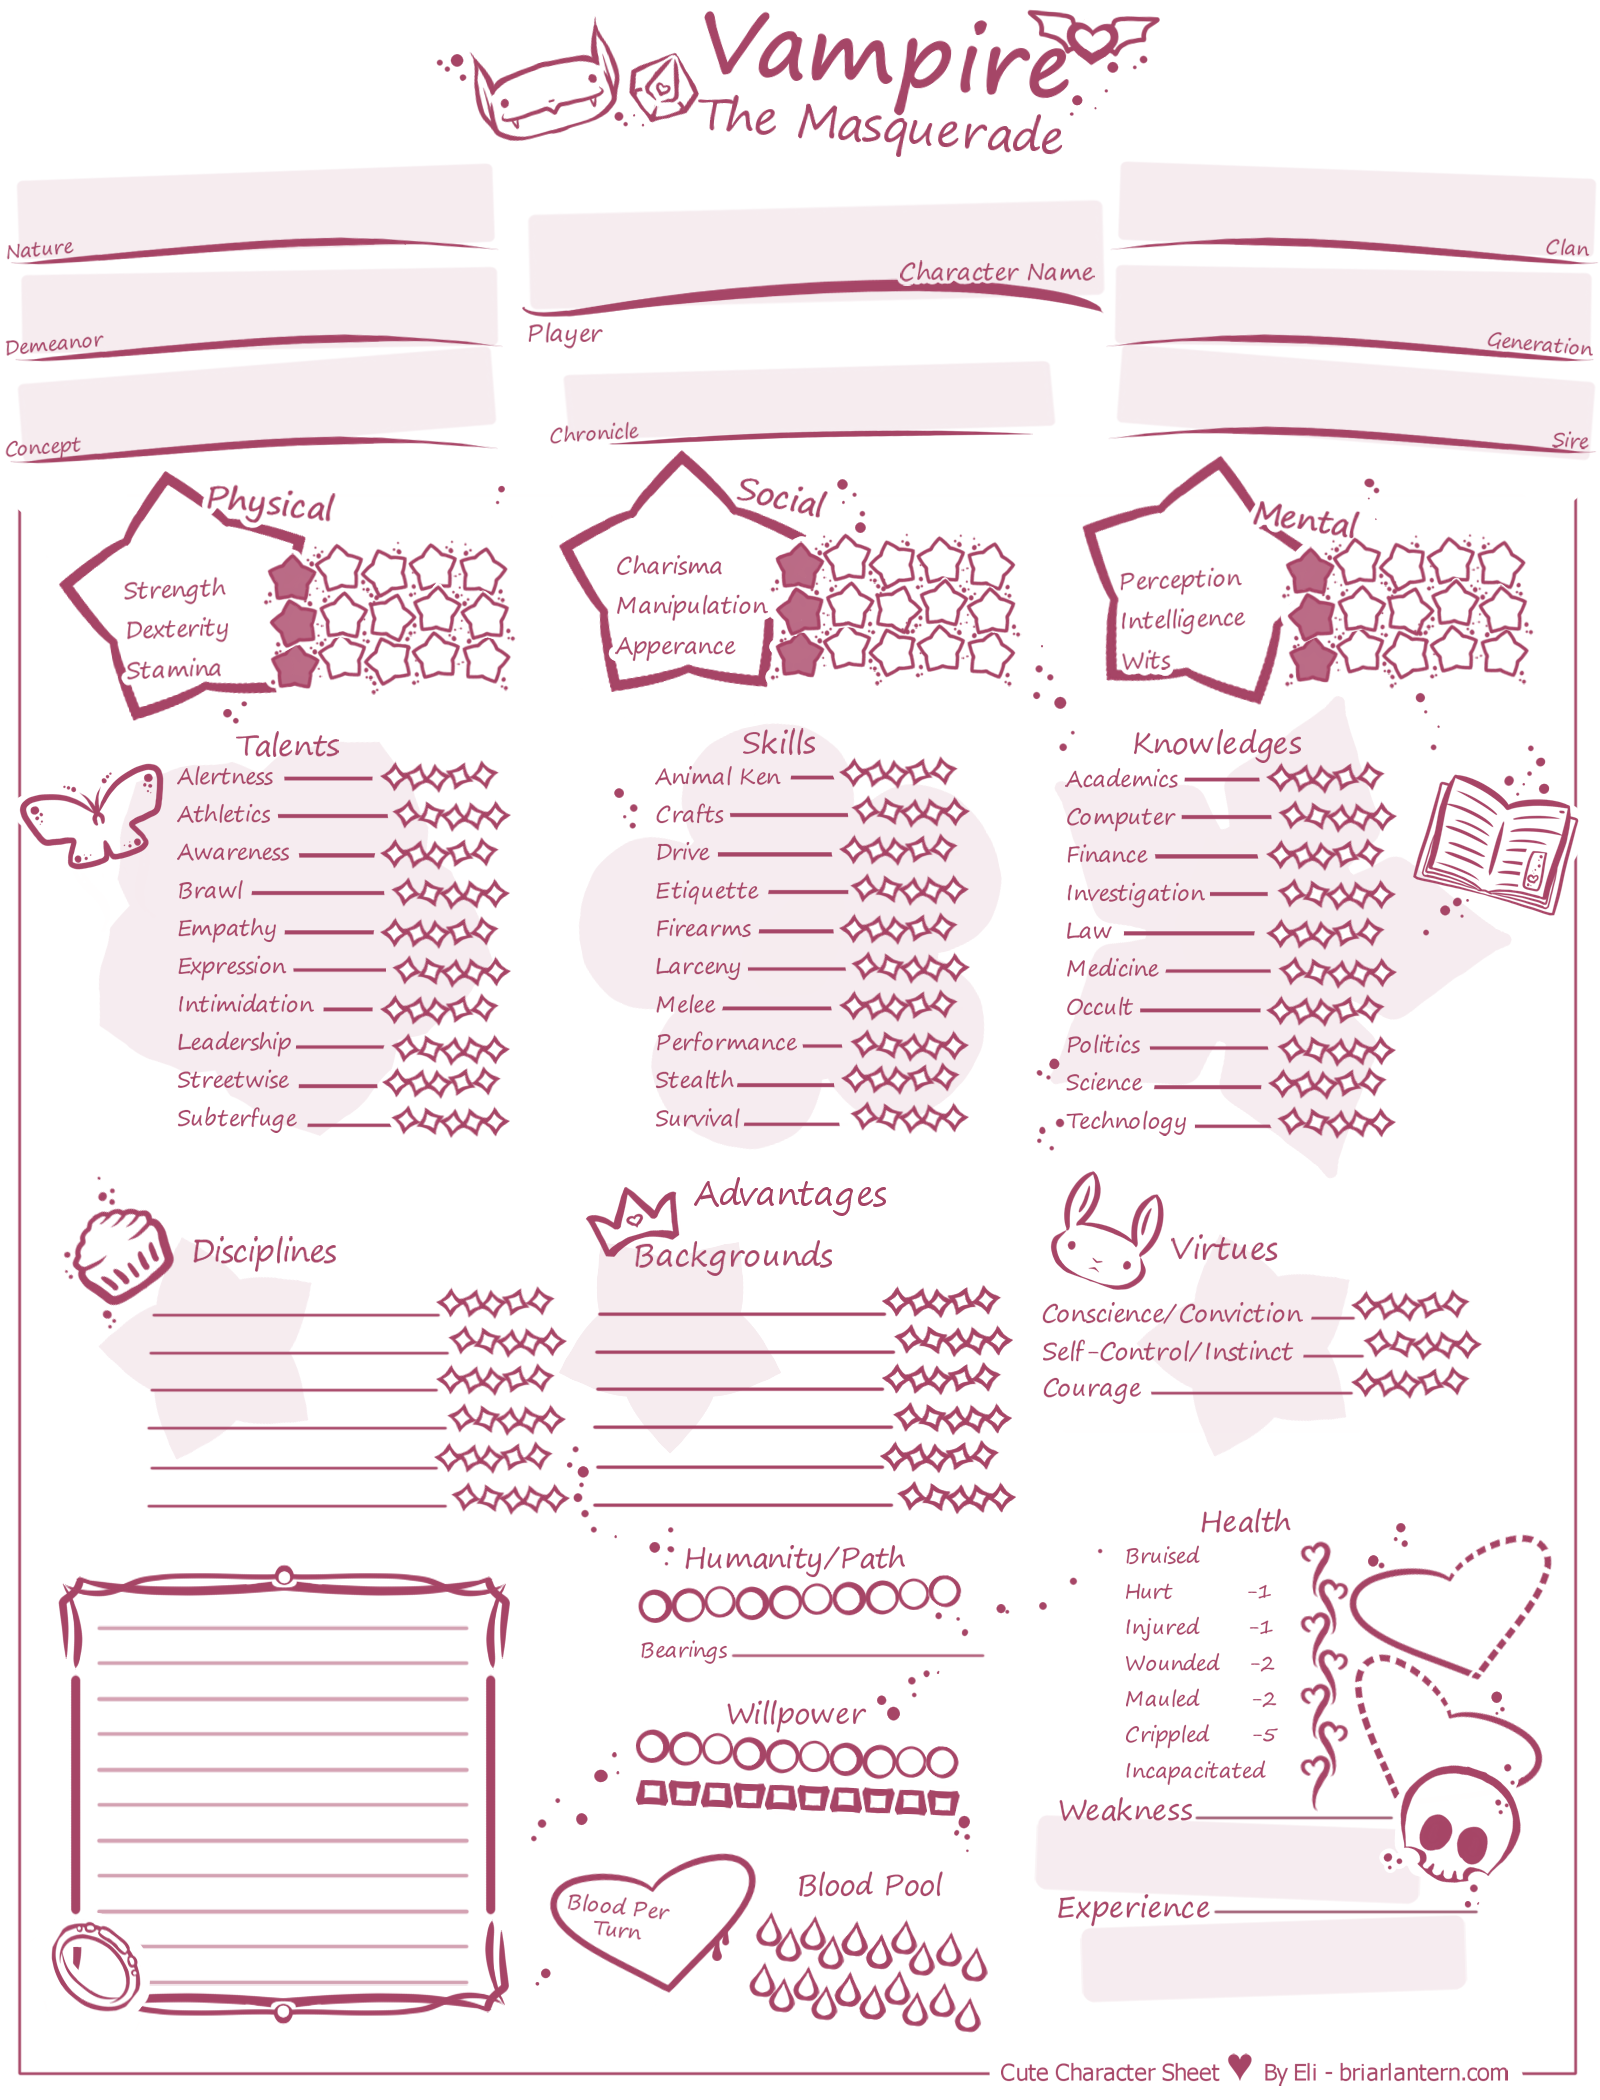 VTM: C.M.A Character Sheet by Vanilla-Wicked on DeviantArt